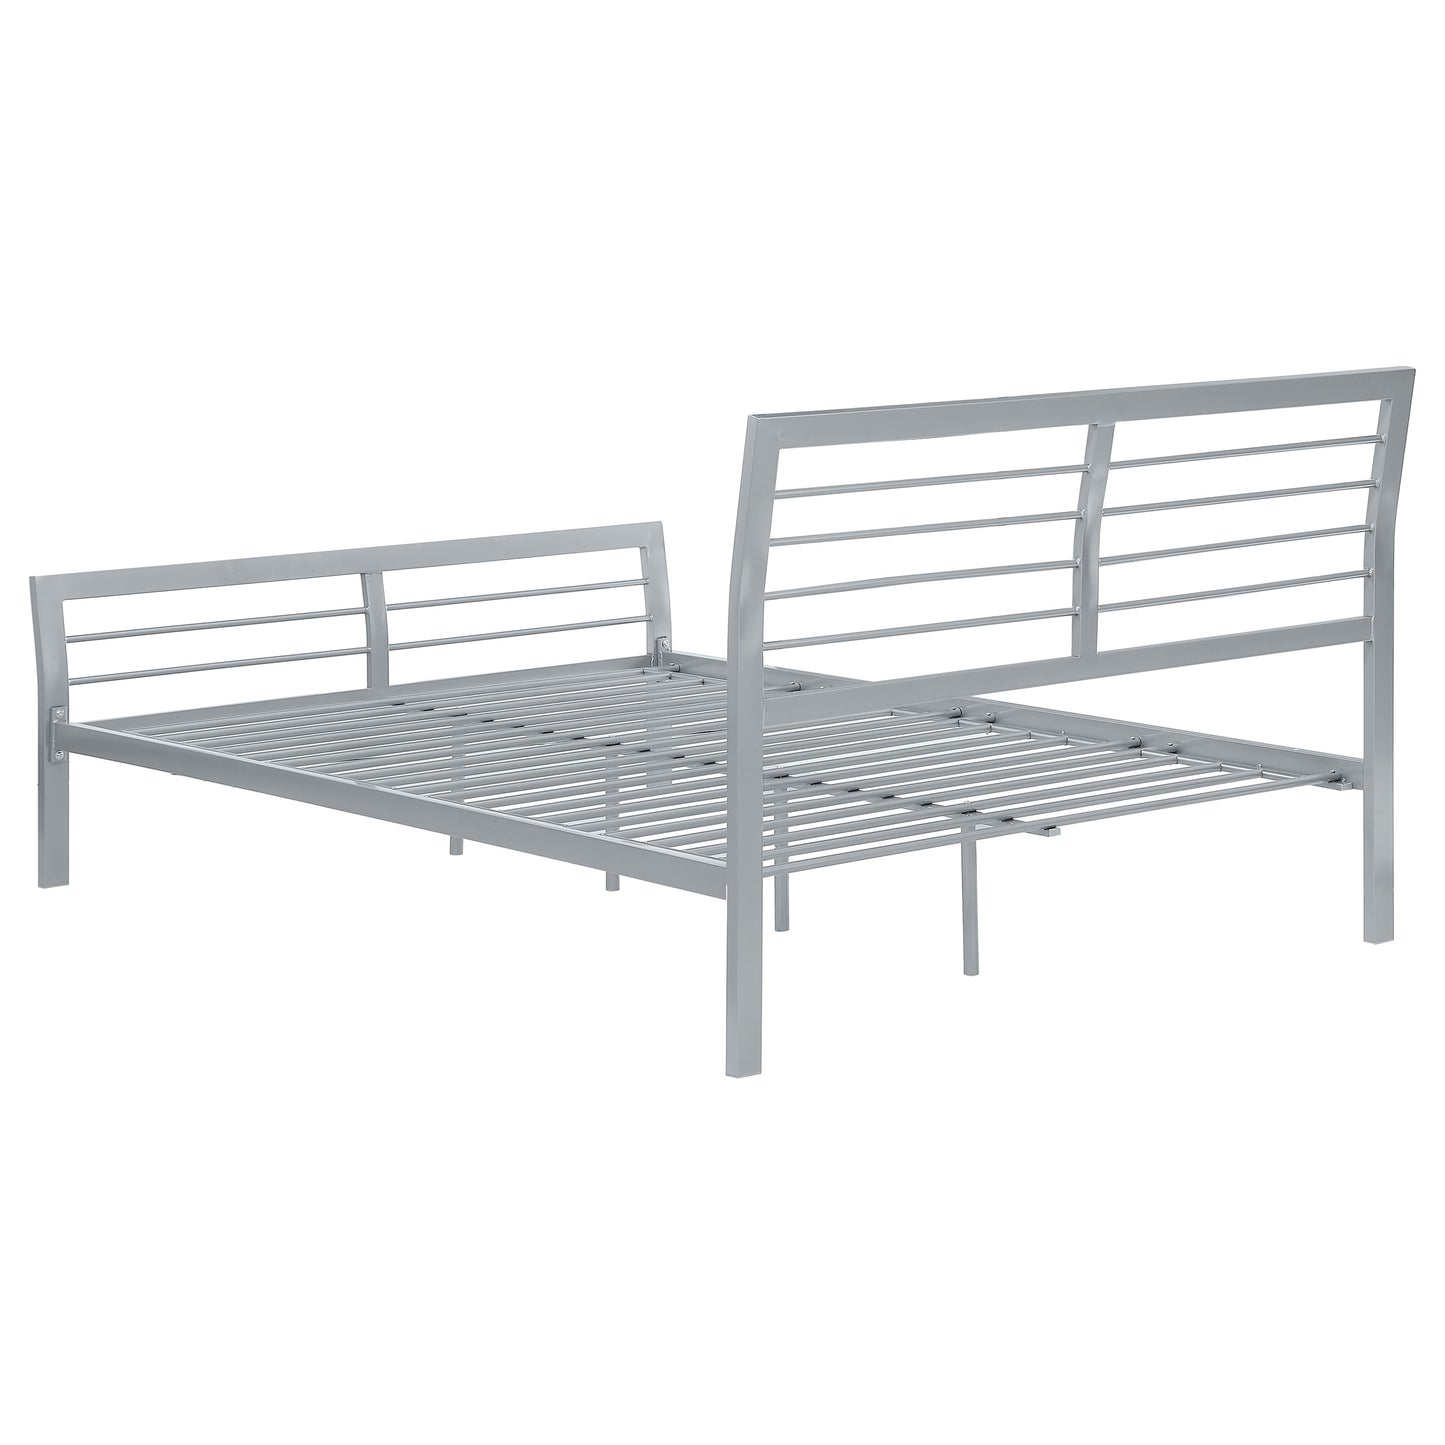 Cooper Metal Full Open Frame Bed Silver